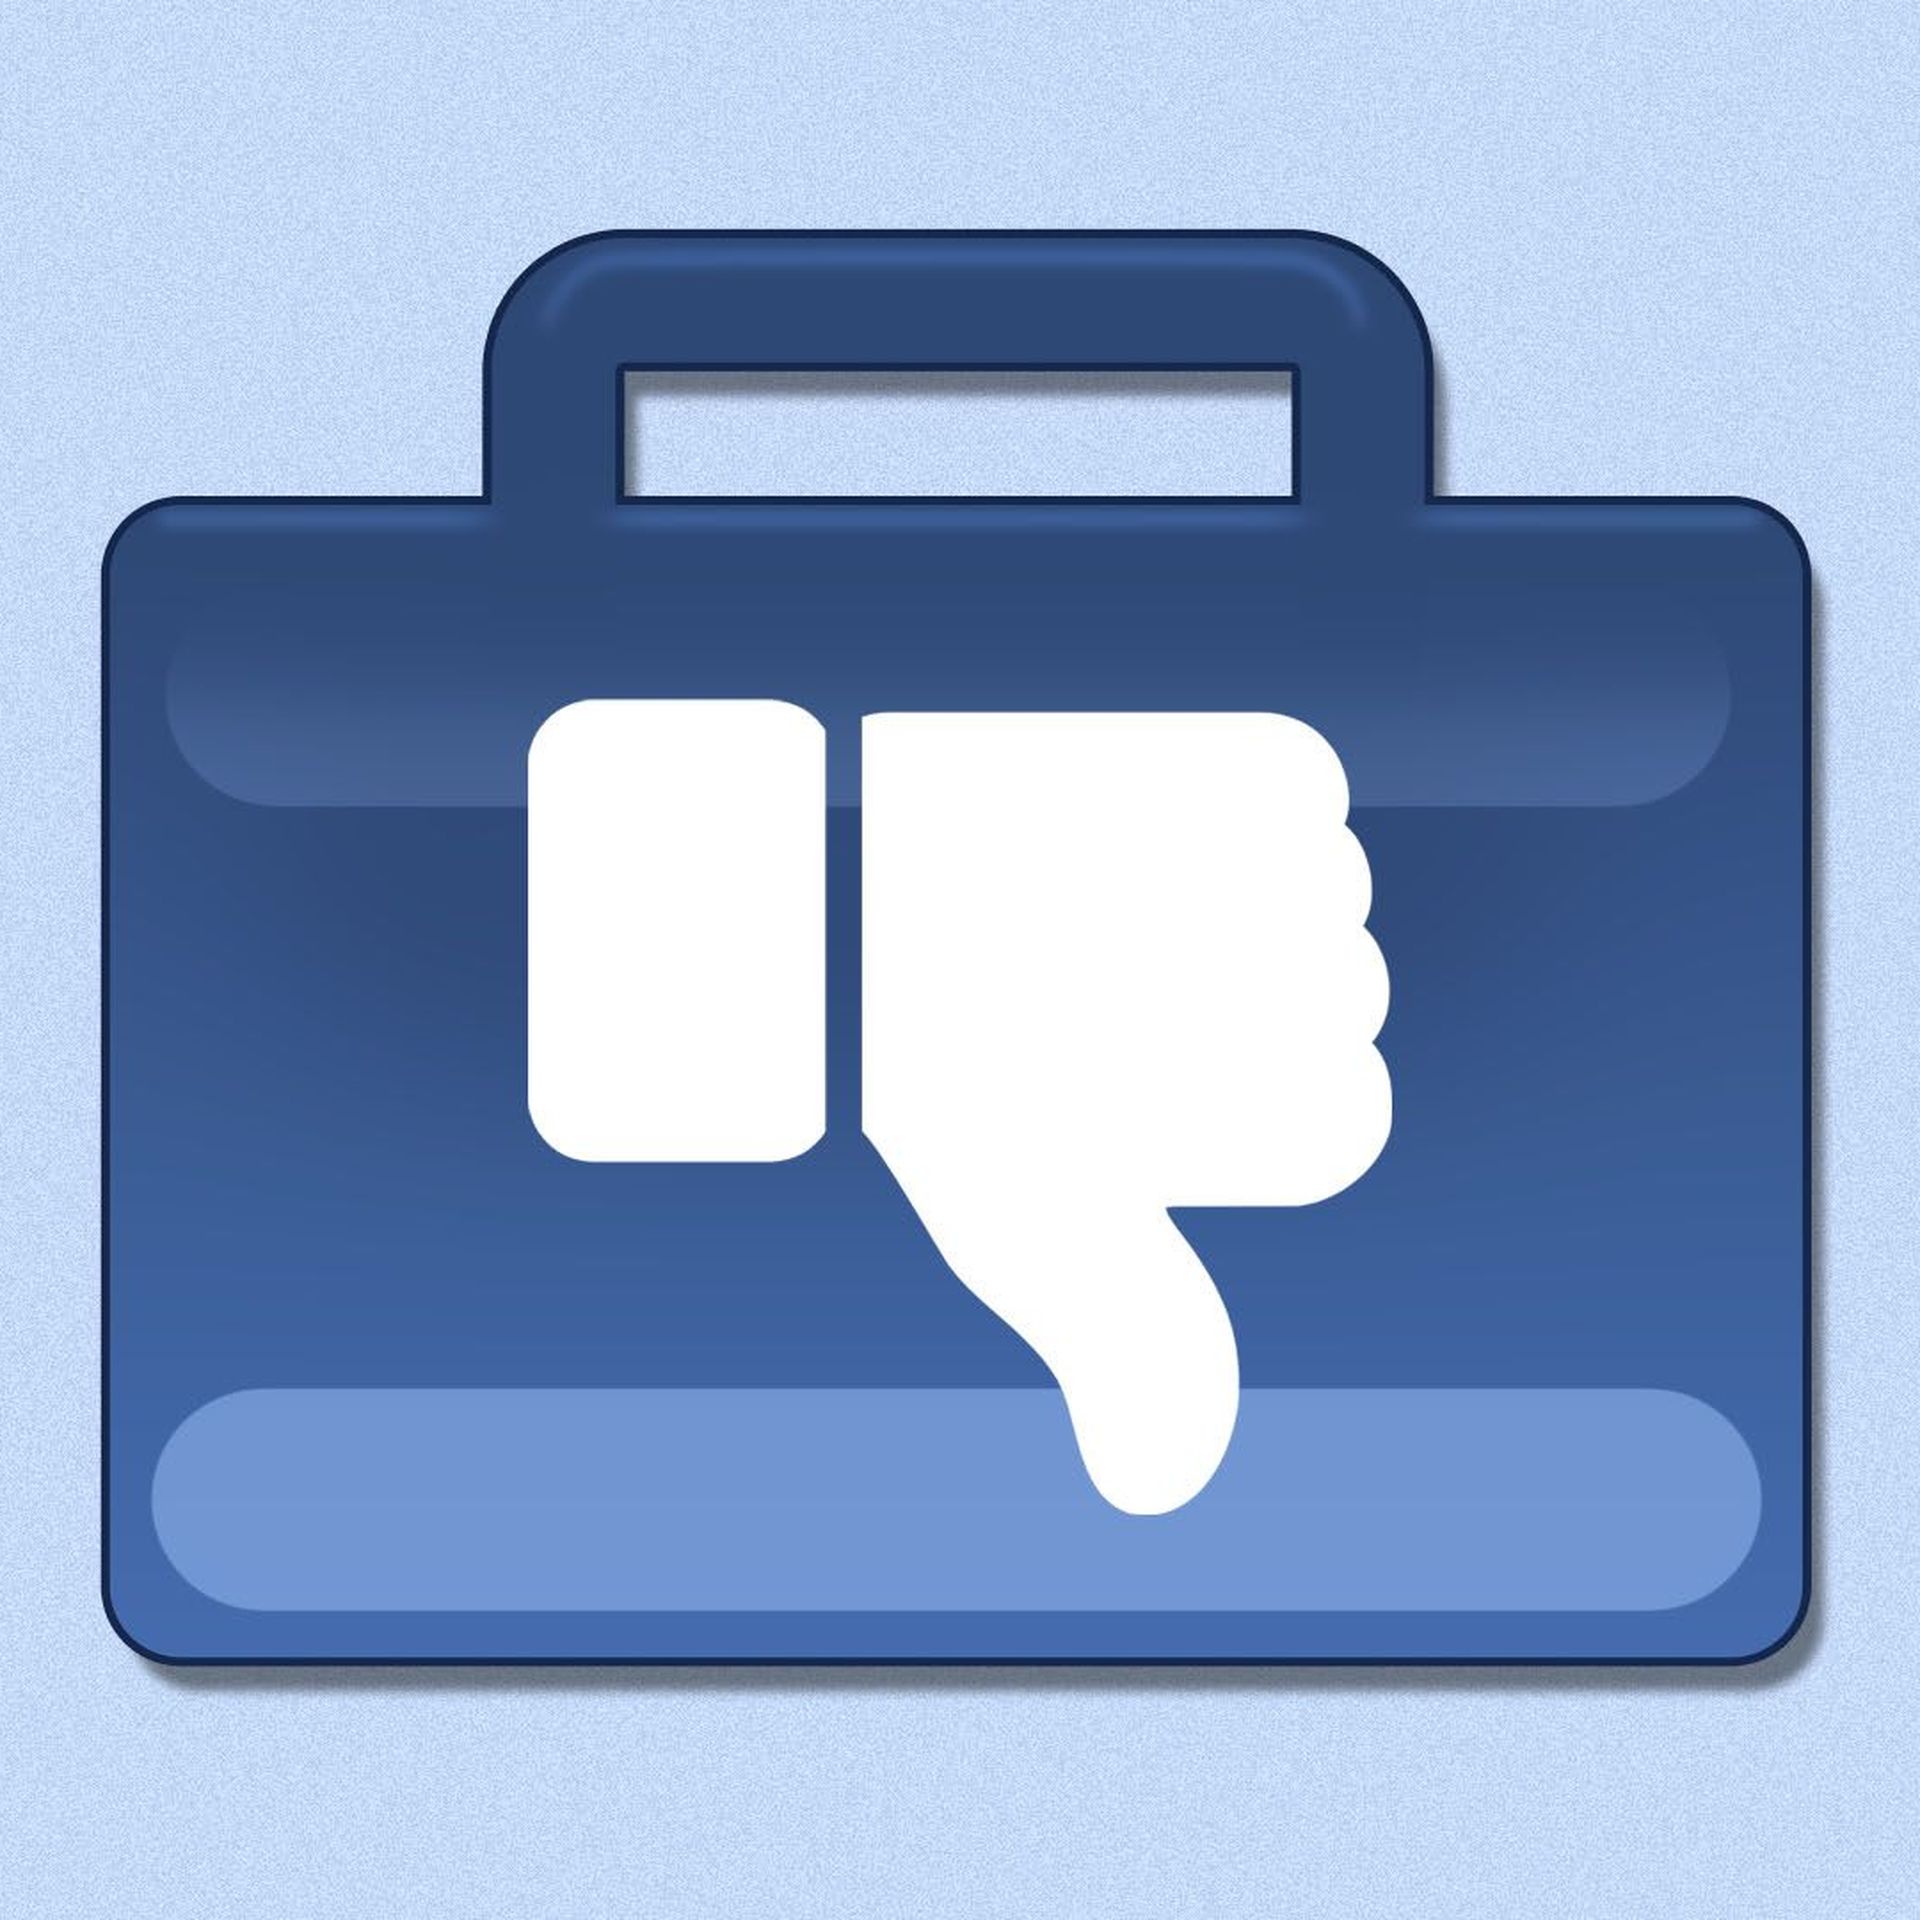 Illustration of a facebook like icon shaped like a briefcase with a thumb pointing down